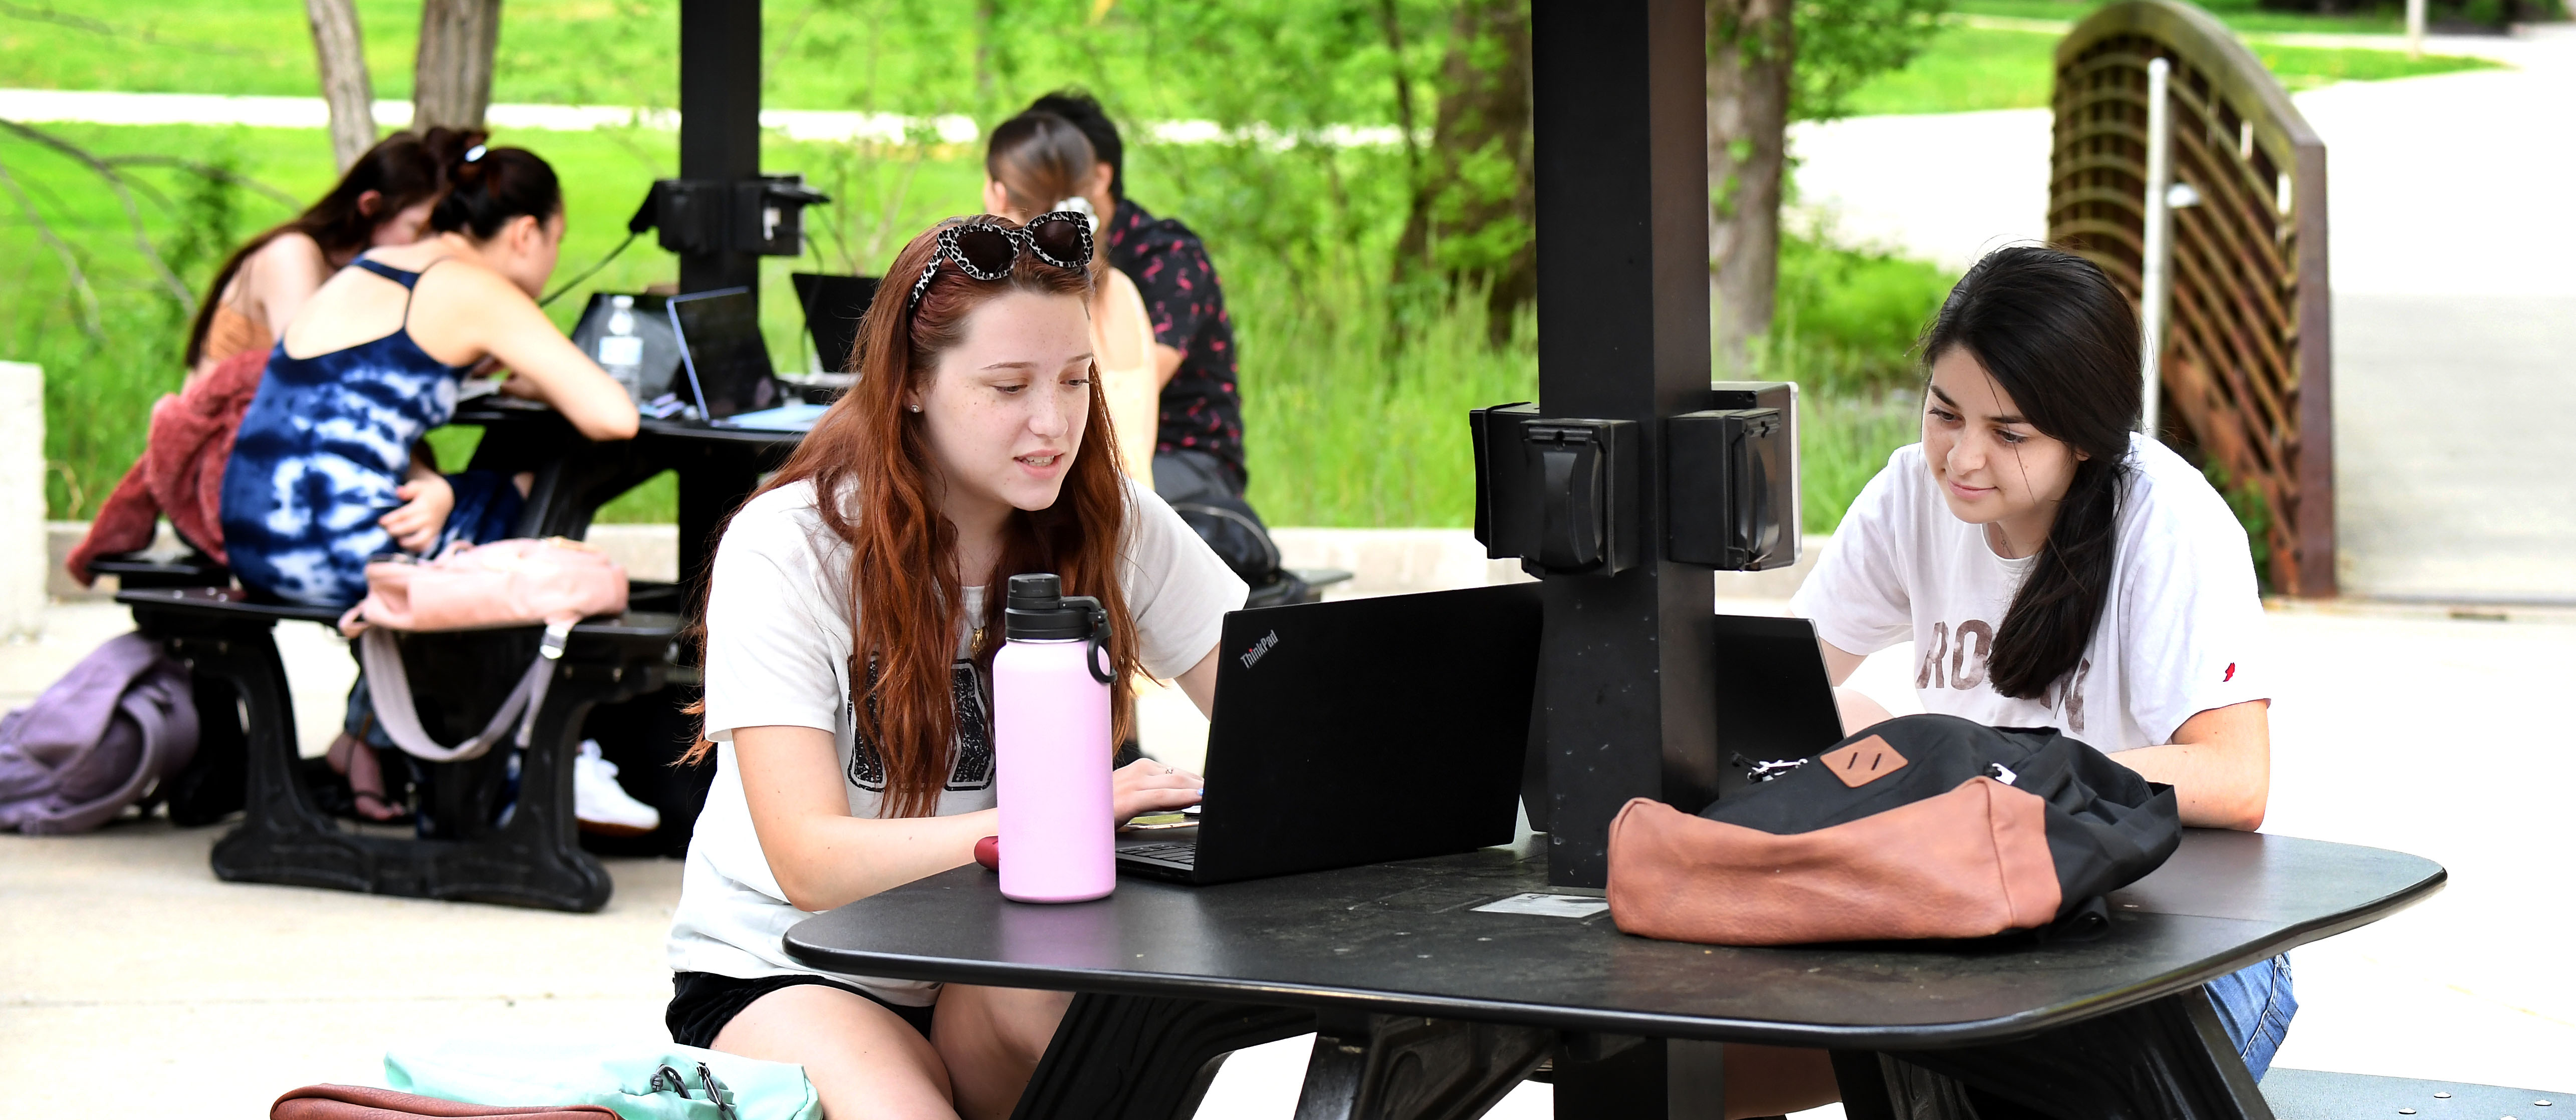 students on laptops outside